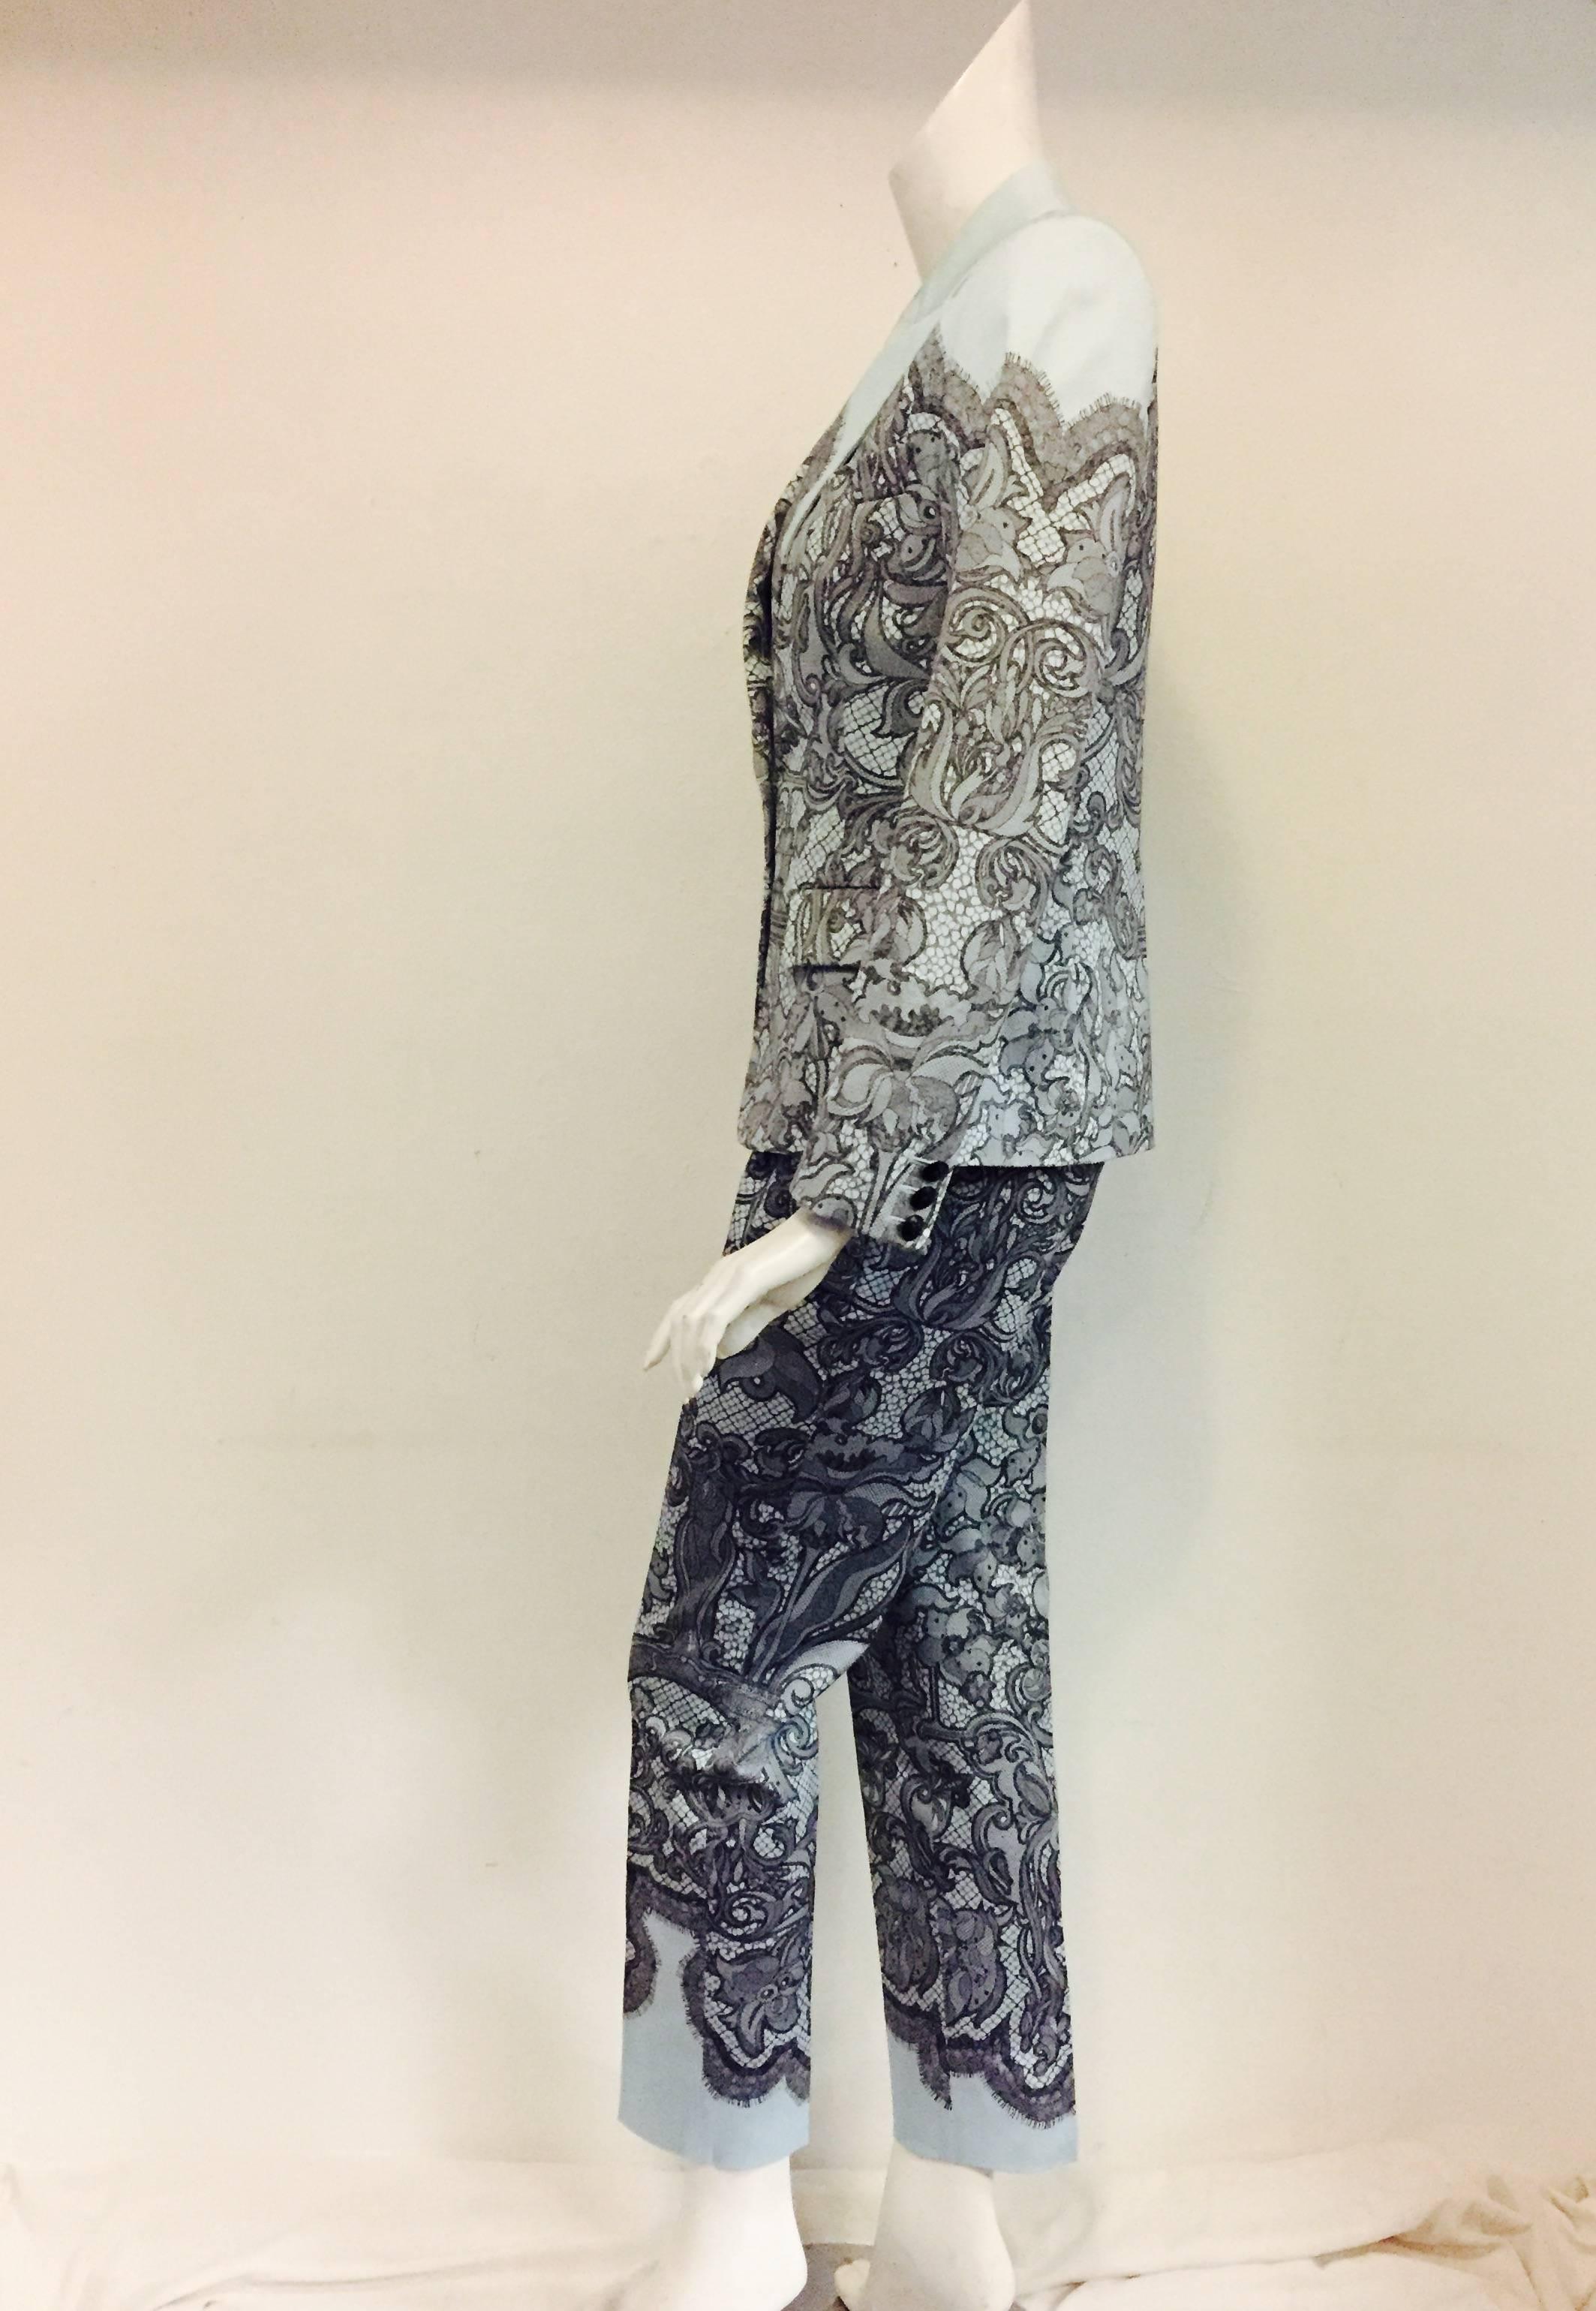 Pant Suit In Light Blue Background With Black Lace is a must for any devotee of Emilio Pucci's designs!   Jacket has single button closure and 2 front flap pockets with one addition small faux pocket.  Notch collar.  Sleeves are finished with 3